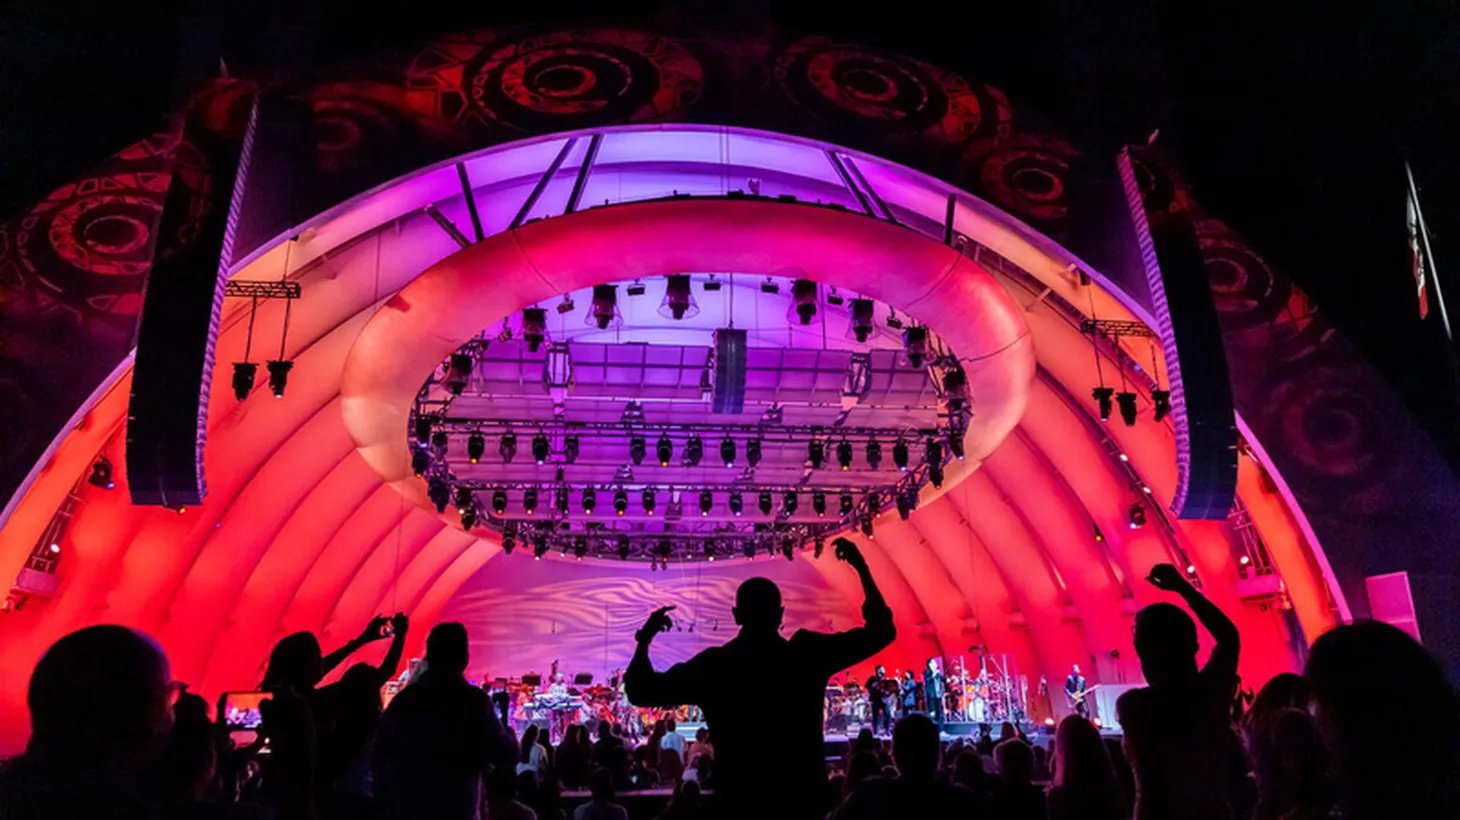 Party on, KCRW Festival returns to the Hollywood Bowl in 2023.